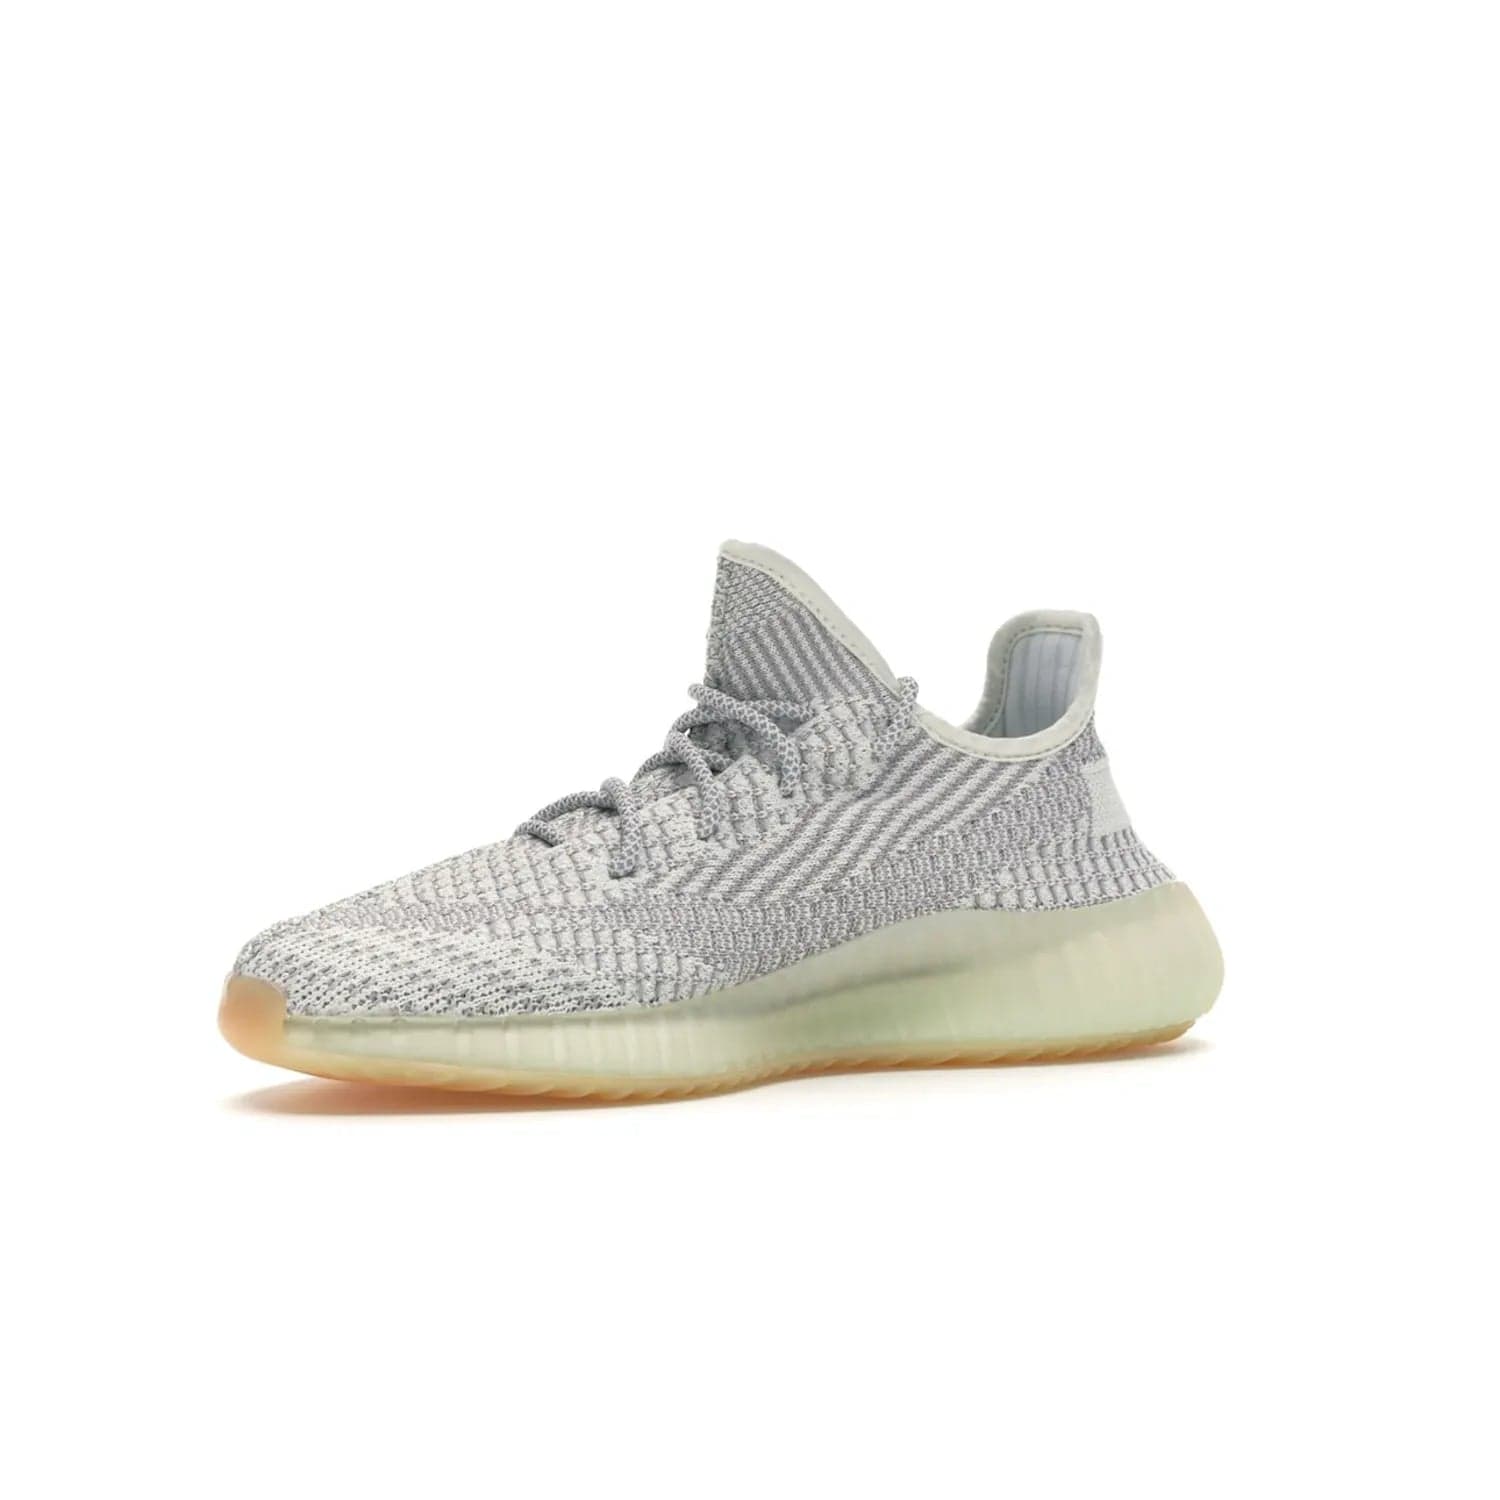 adidas Yeezy Boost 350 V2 Yeshaya (Non-Reflective) - Image 16 - Only at www.BallersClubKickz.com - Step out in style with the adidas Yeezy Boost 350 V2 Yeshaya (Non-Reflective). Gray-and-white Primeknit upper with mesh side stripe & rope laces, plus a translucent Boost sole with a hint of yellow. Make a statement and feel comfortable with this stylish sneaker.